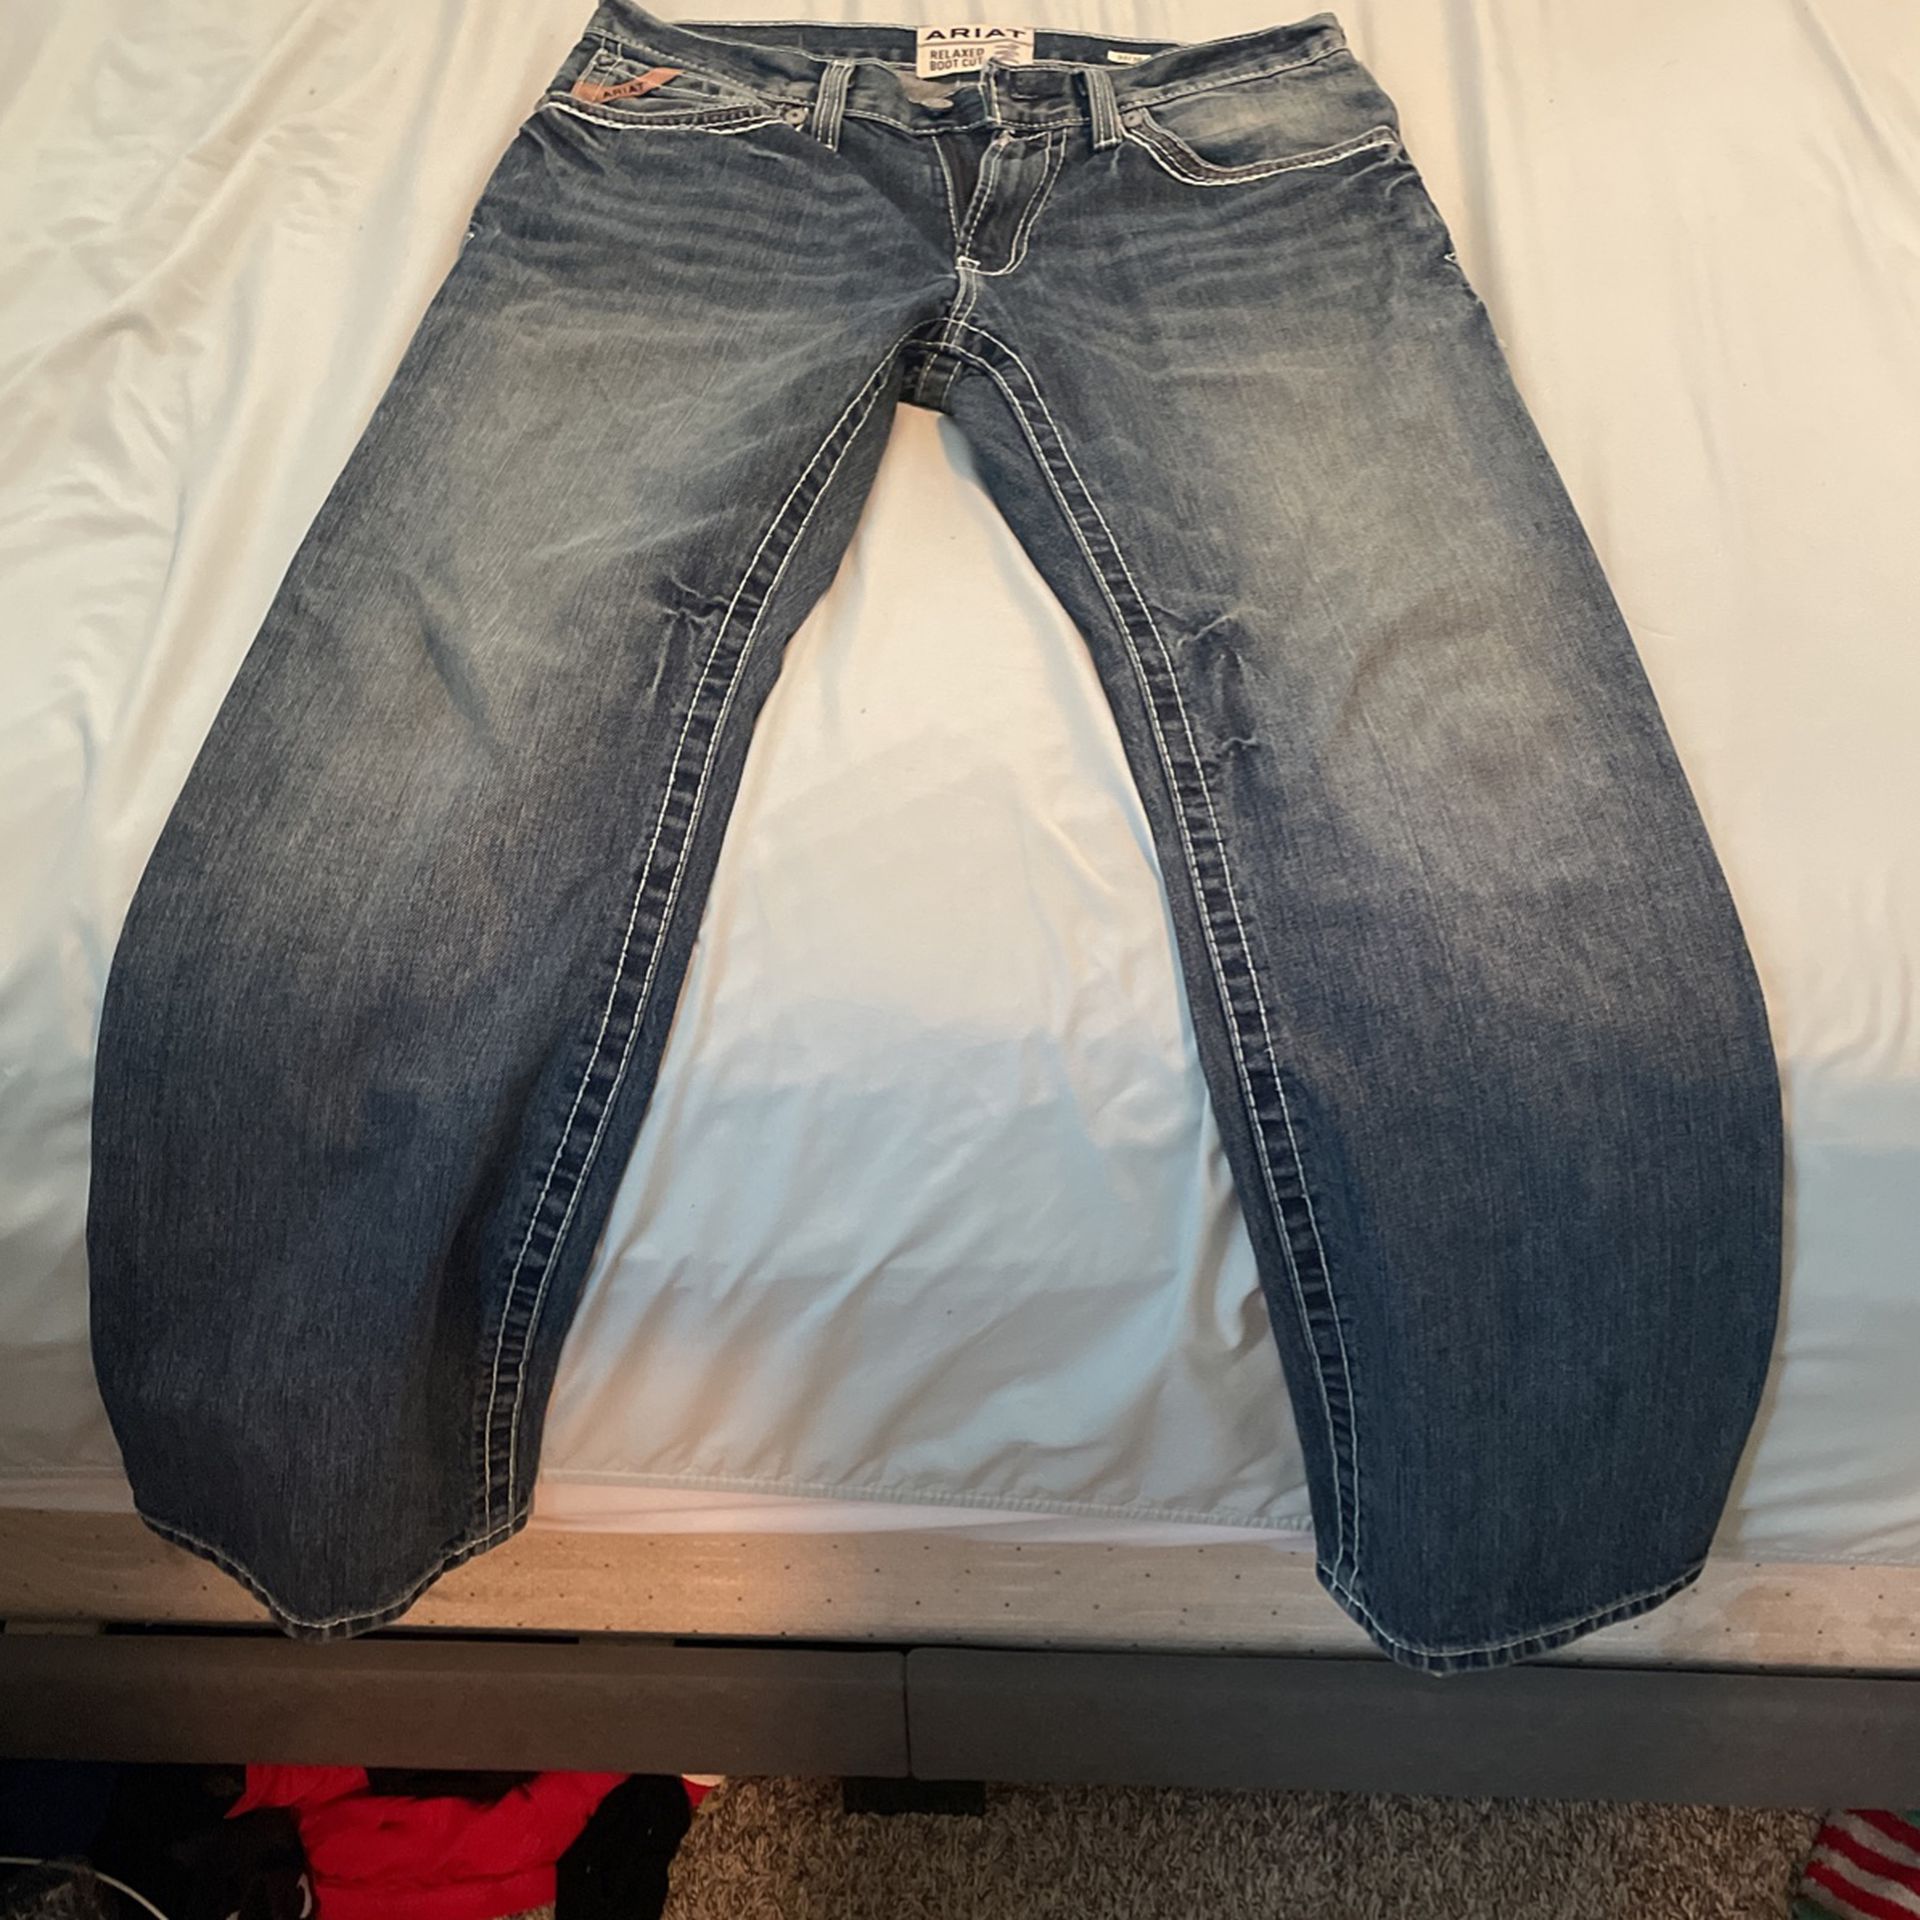 Ariat Jeans Size Sale in Humble, TX -